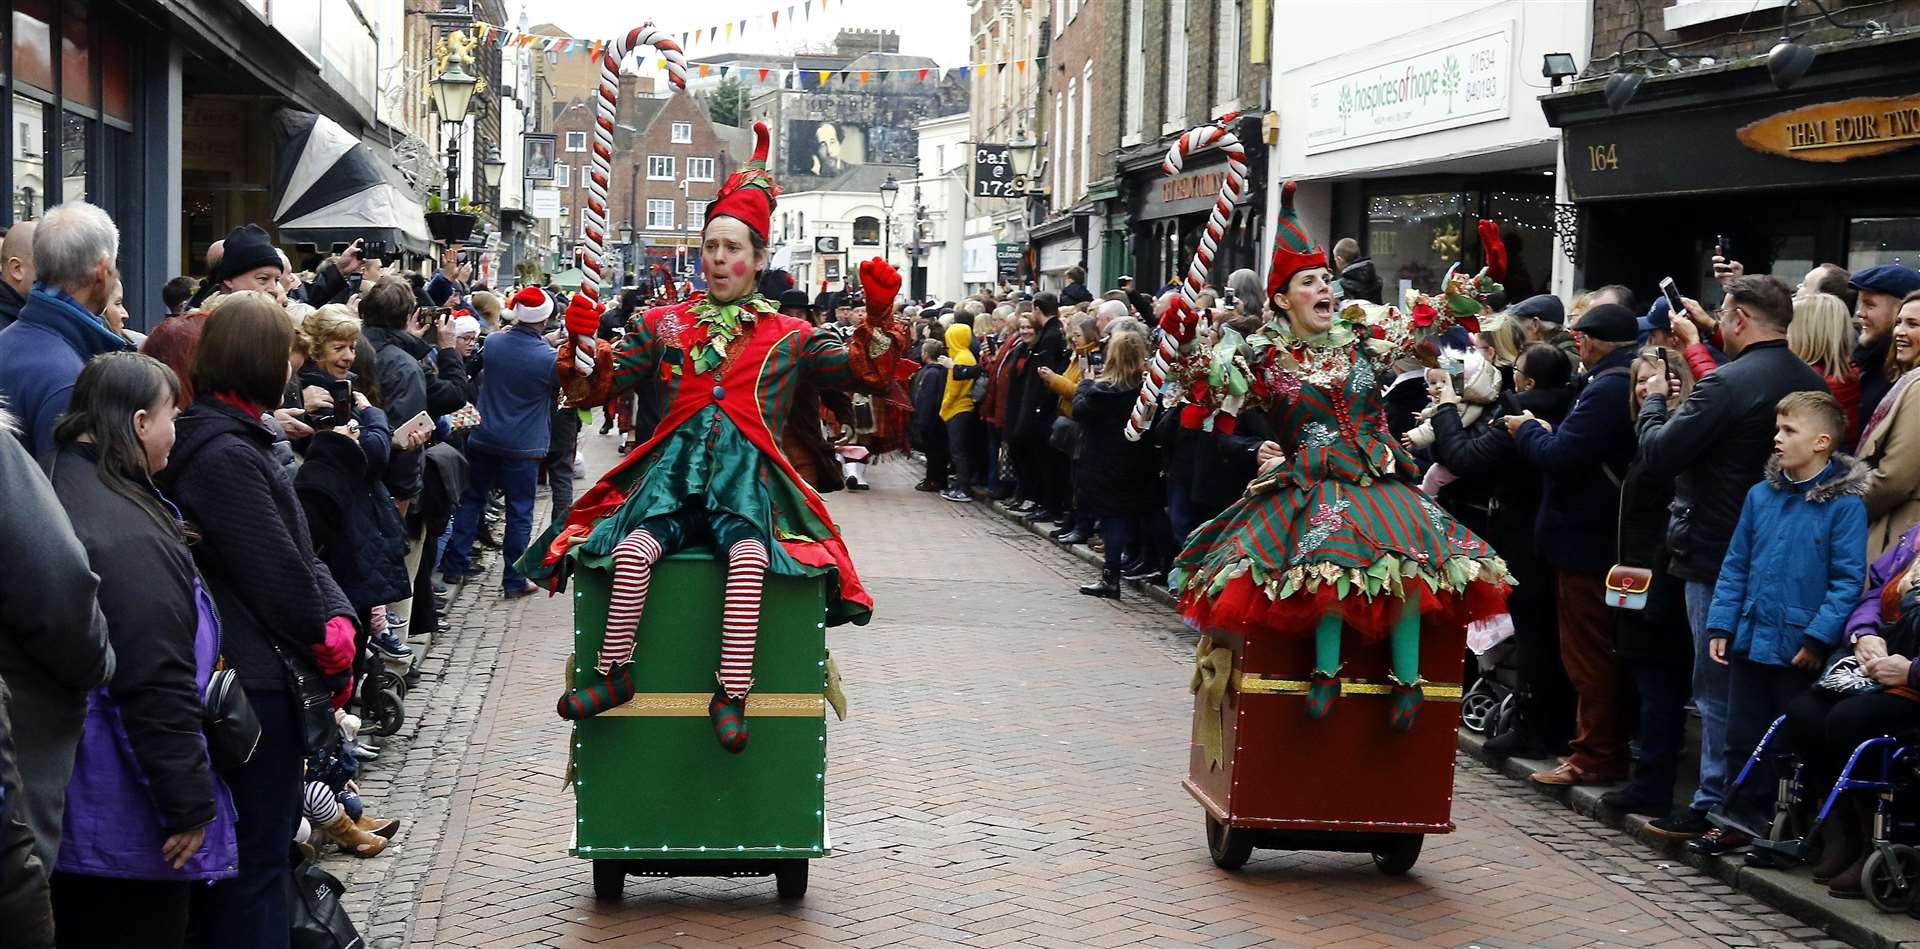 Dickens Christmas Festival in Rochester parades will return to the town centre again this year after the 2020 lockdown hiatus